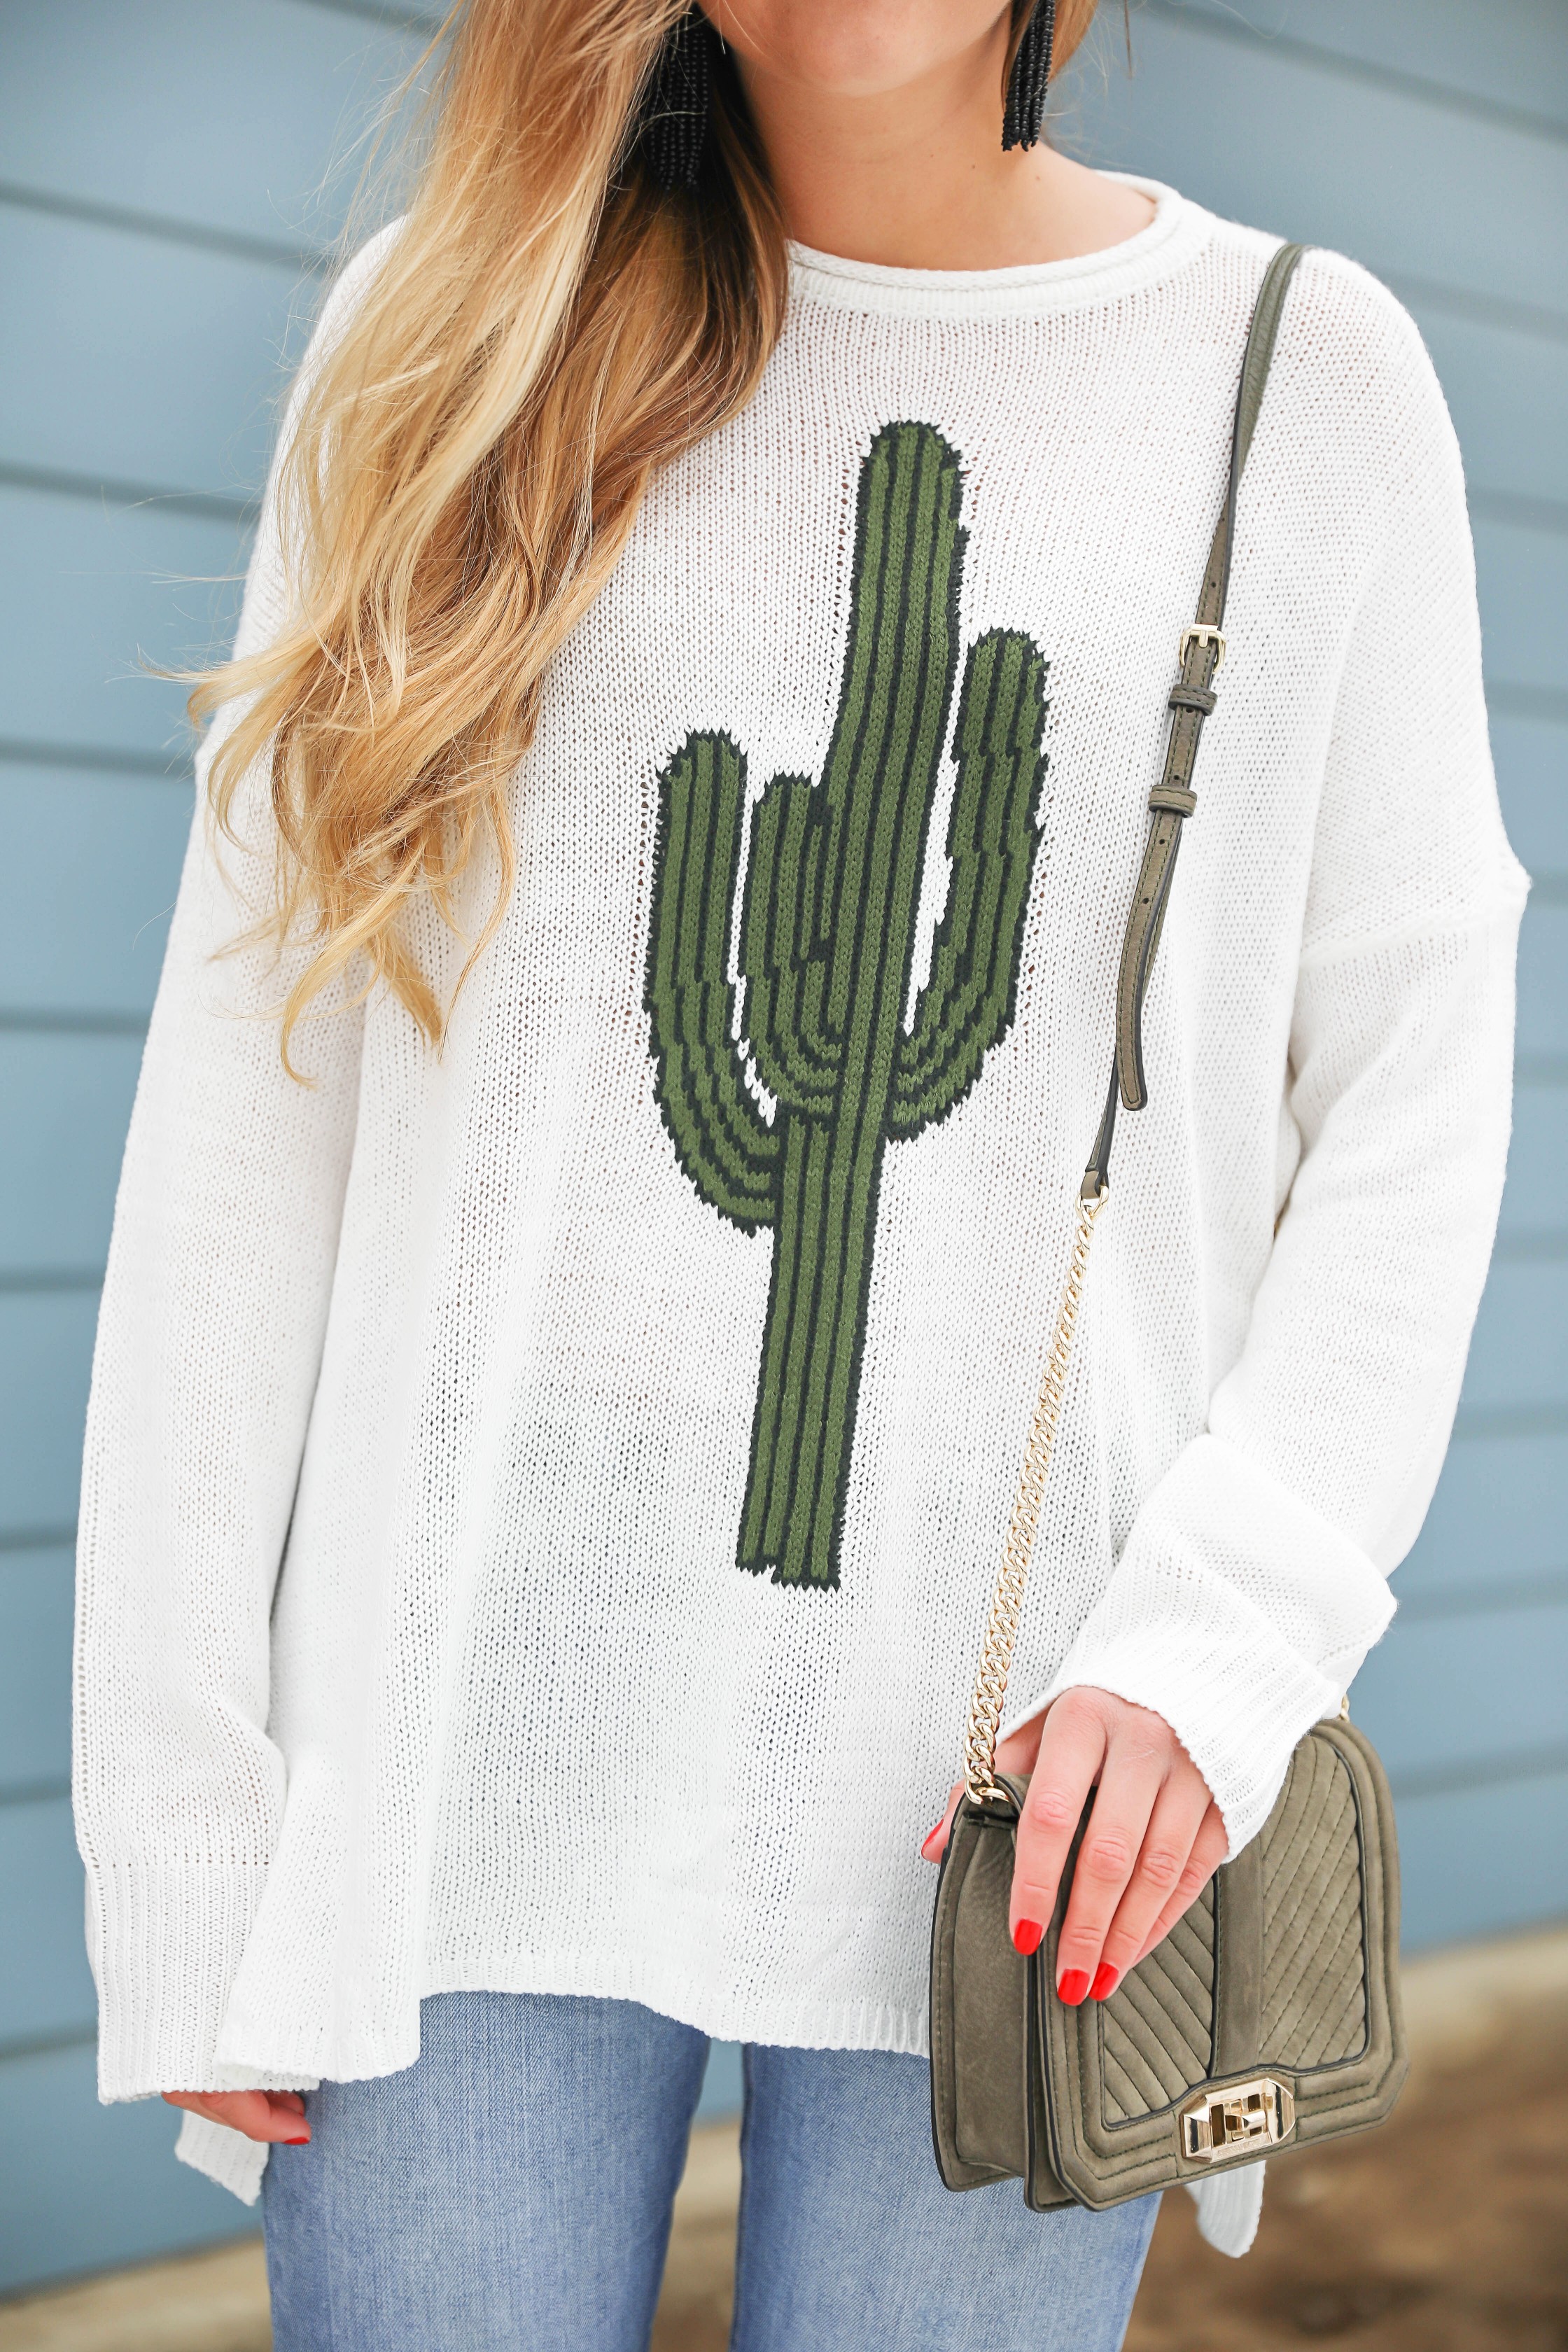 Super cute cactus sweater for spring and summer! This sweater is by Show Me Your Mumu. I love their spring cactus line, but this cactus sweater is my favorite! I paired it with booties, a black belt, and a Rebecca Minkoff bag! Perfect spring outfit inspiration on fashion blog daily dose of charm by lauren lindmark